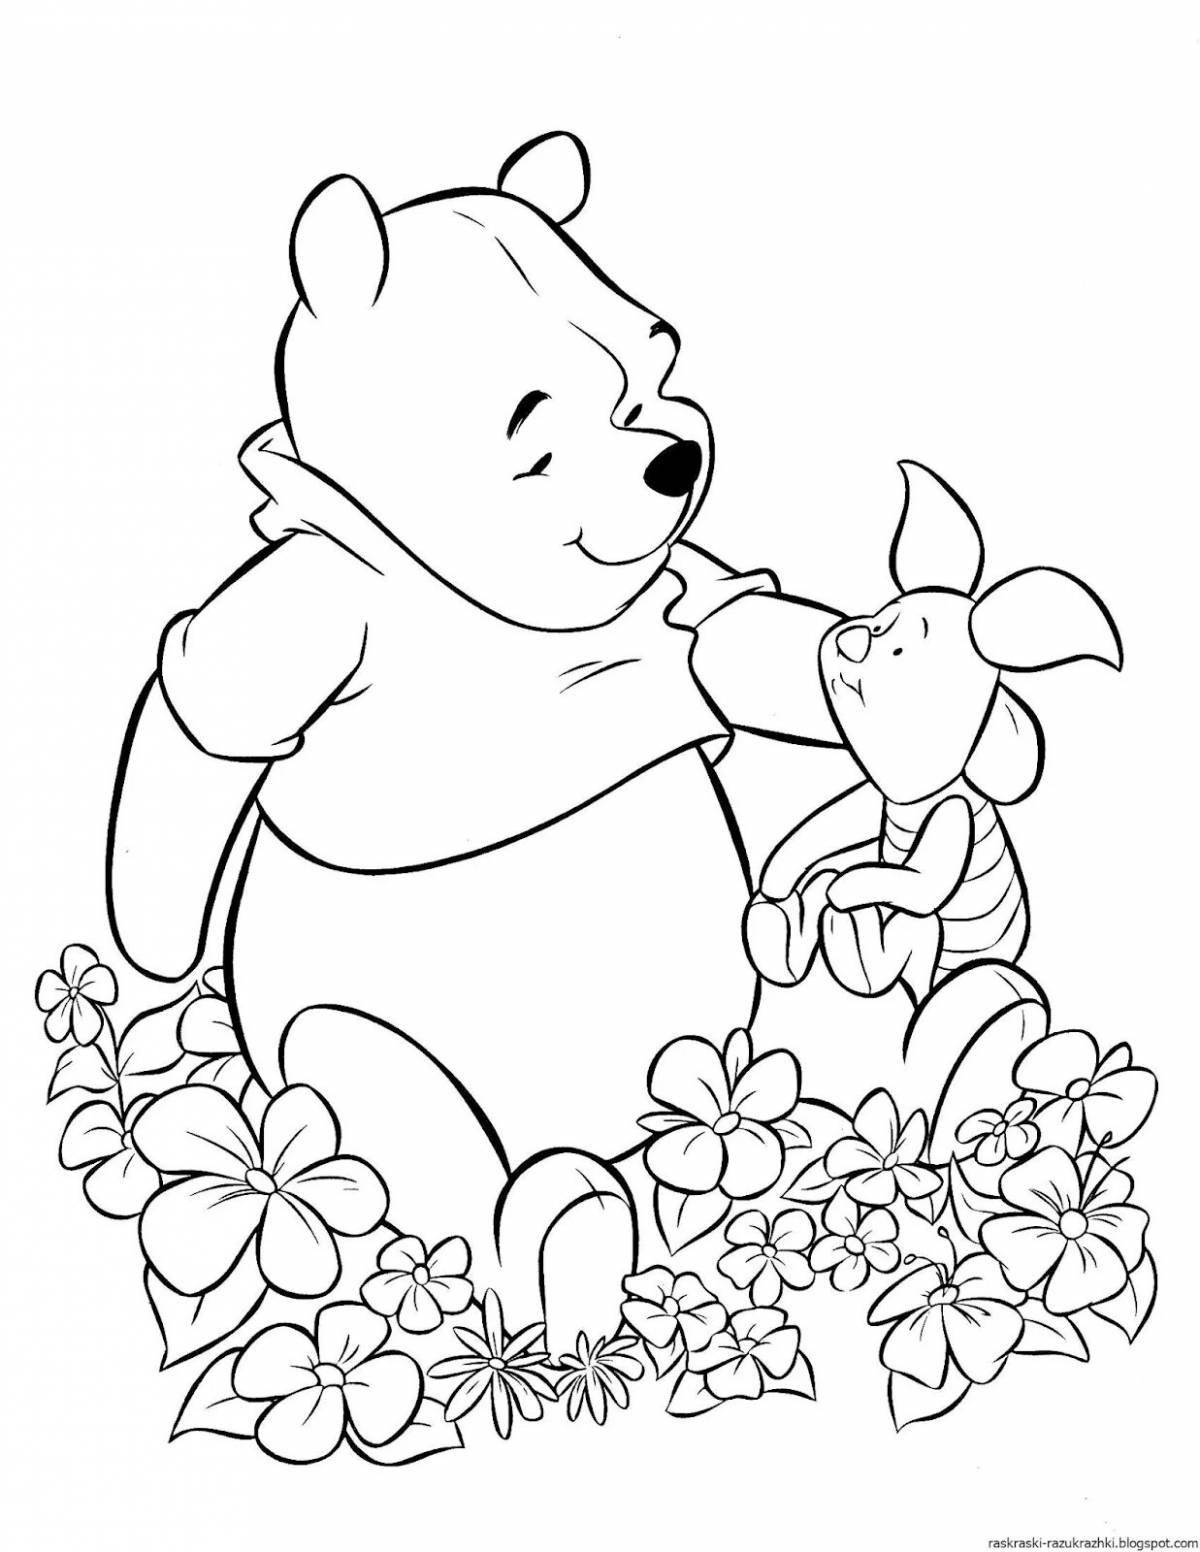 Attractive winnie the pooh coloring book